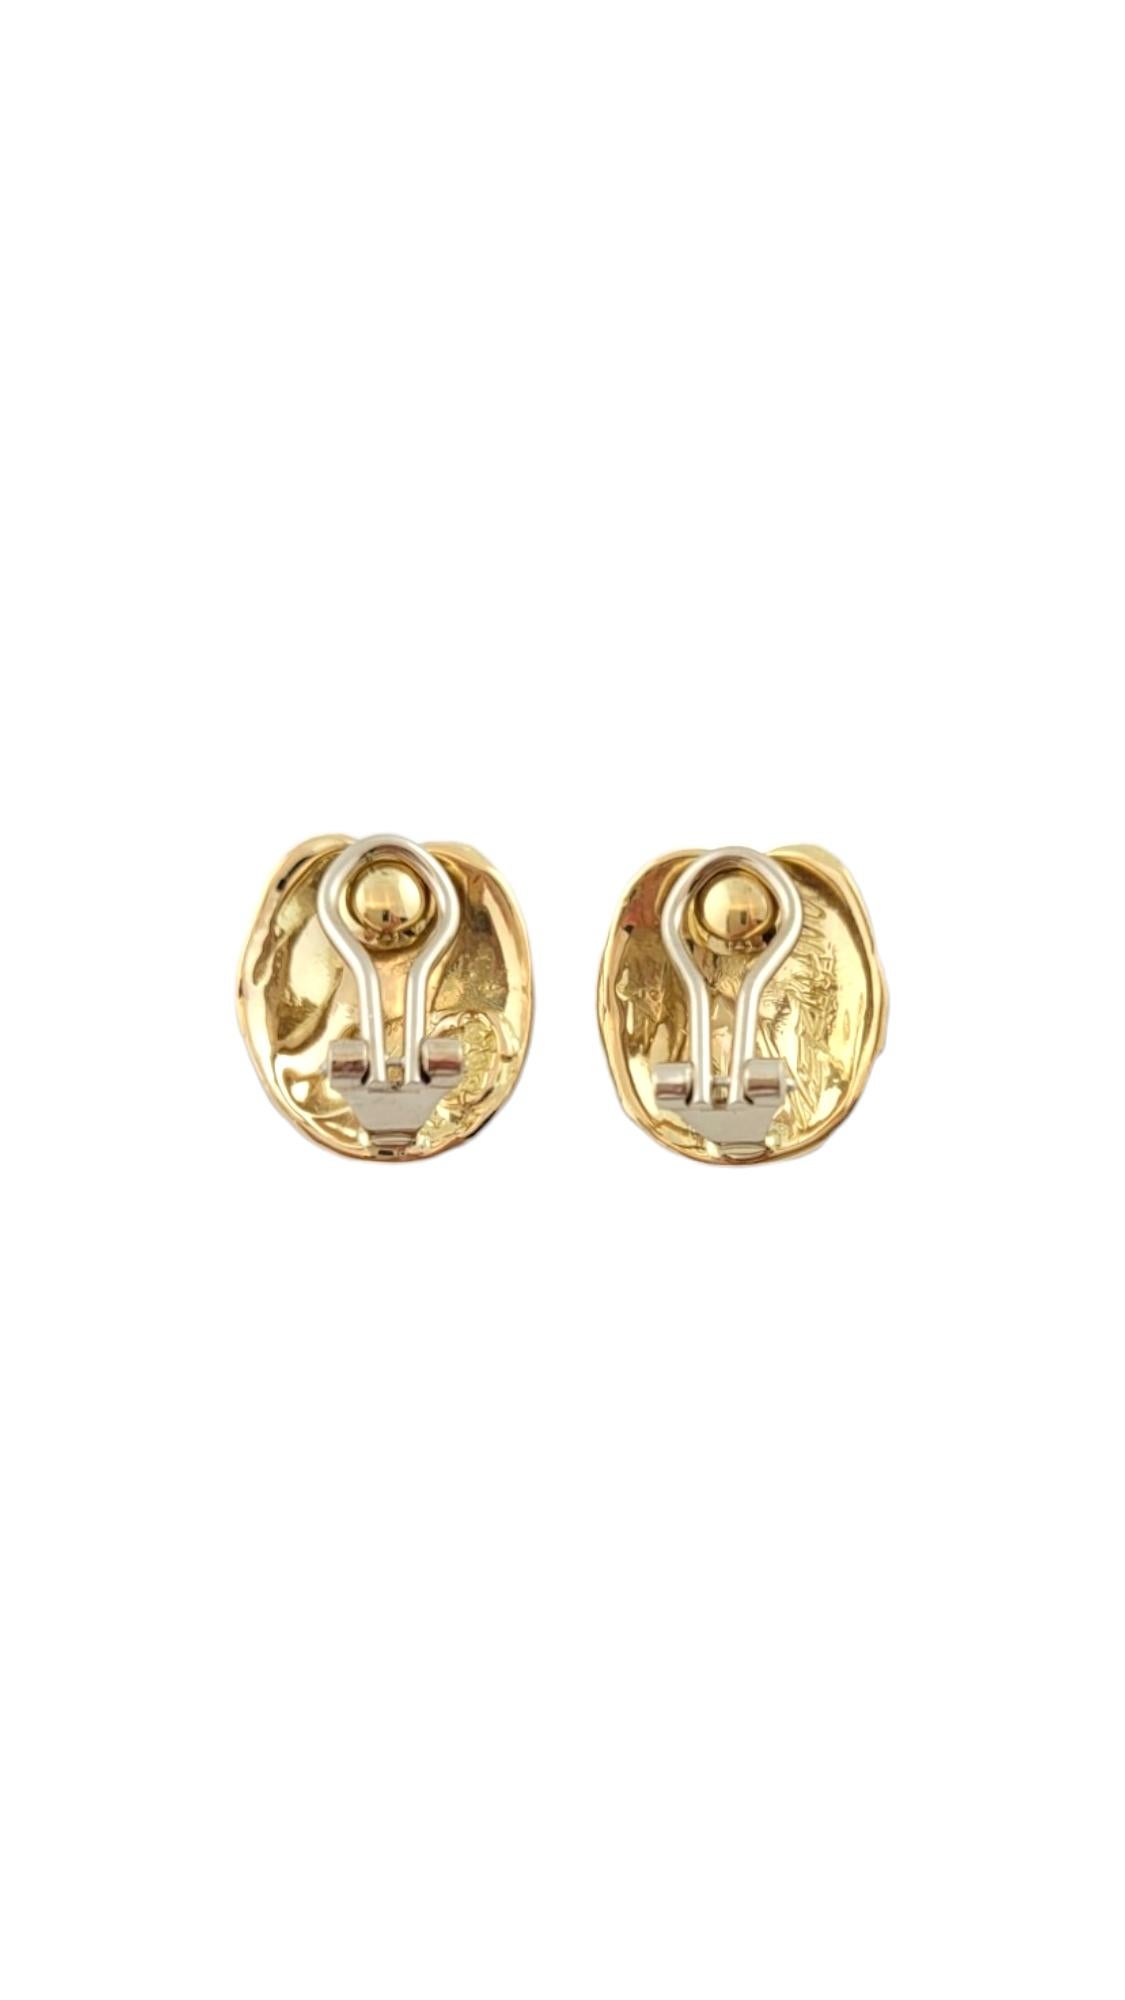 Germano 18K Yellow Gold Italian Medusa Earrings #16090 In Good Condition For Sale In Washington Depot, CT